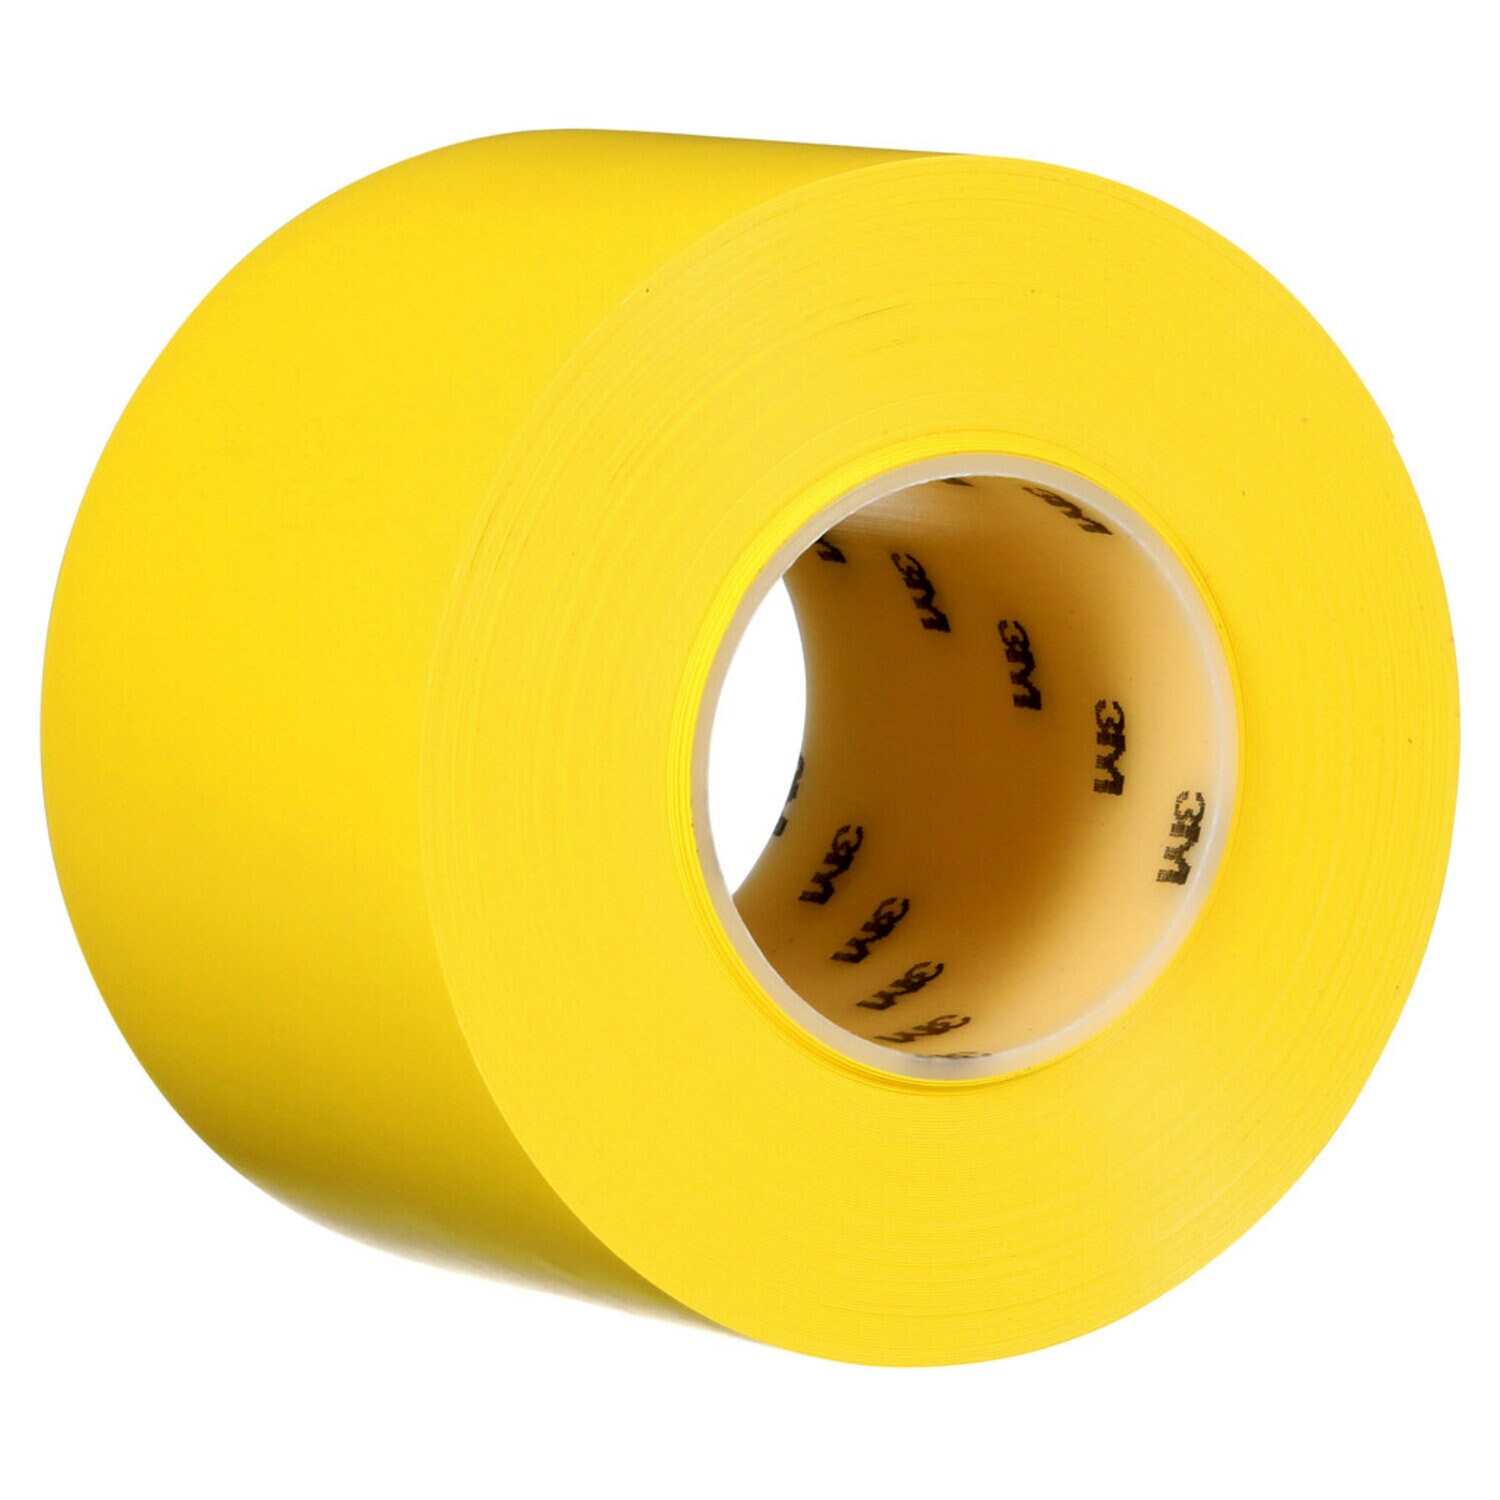 7100253142 - 3M Durable Floor Marking Tape 971, Yellow, 4 in x 36 yd, 17 mil, 3 Rolls/Case, Individually Wrapped Conveniently Packaged